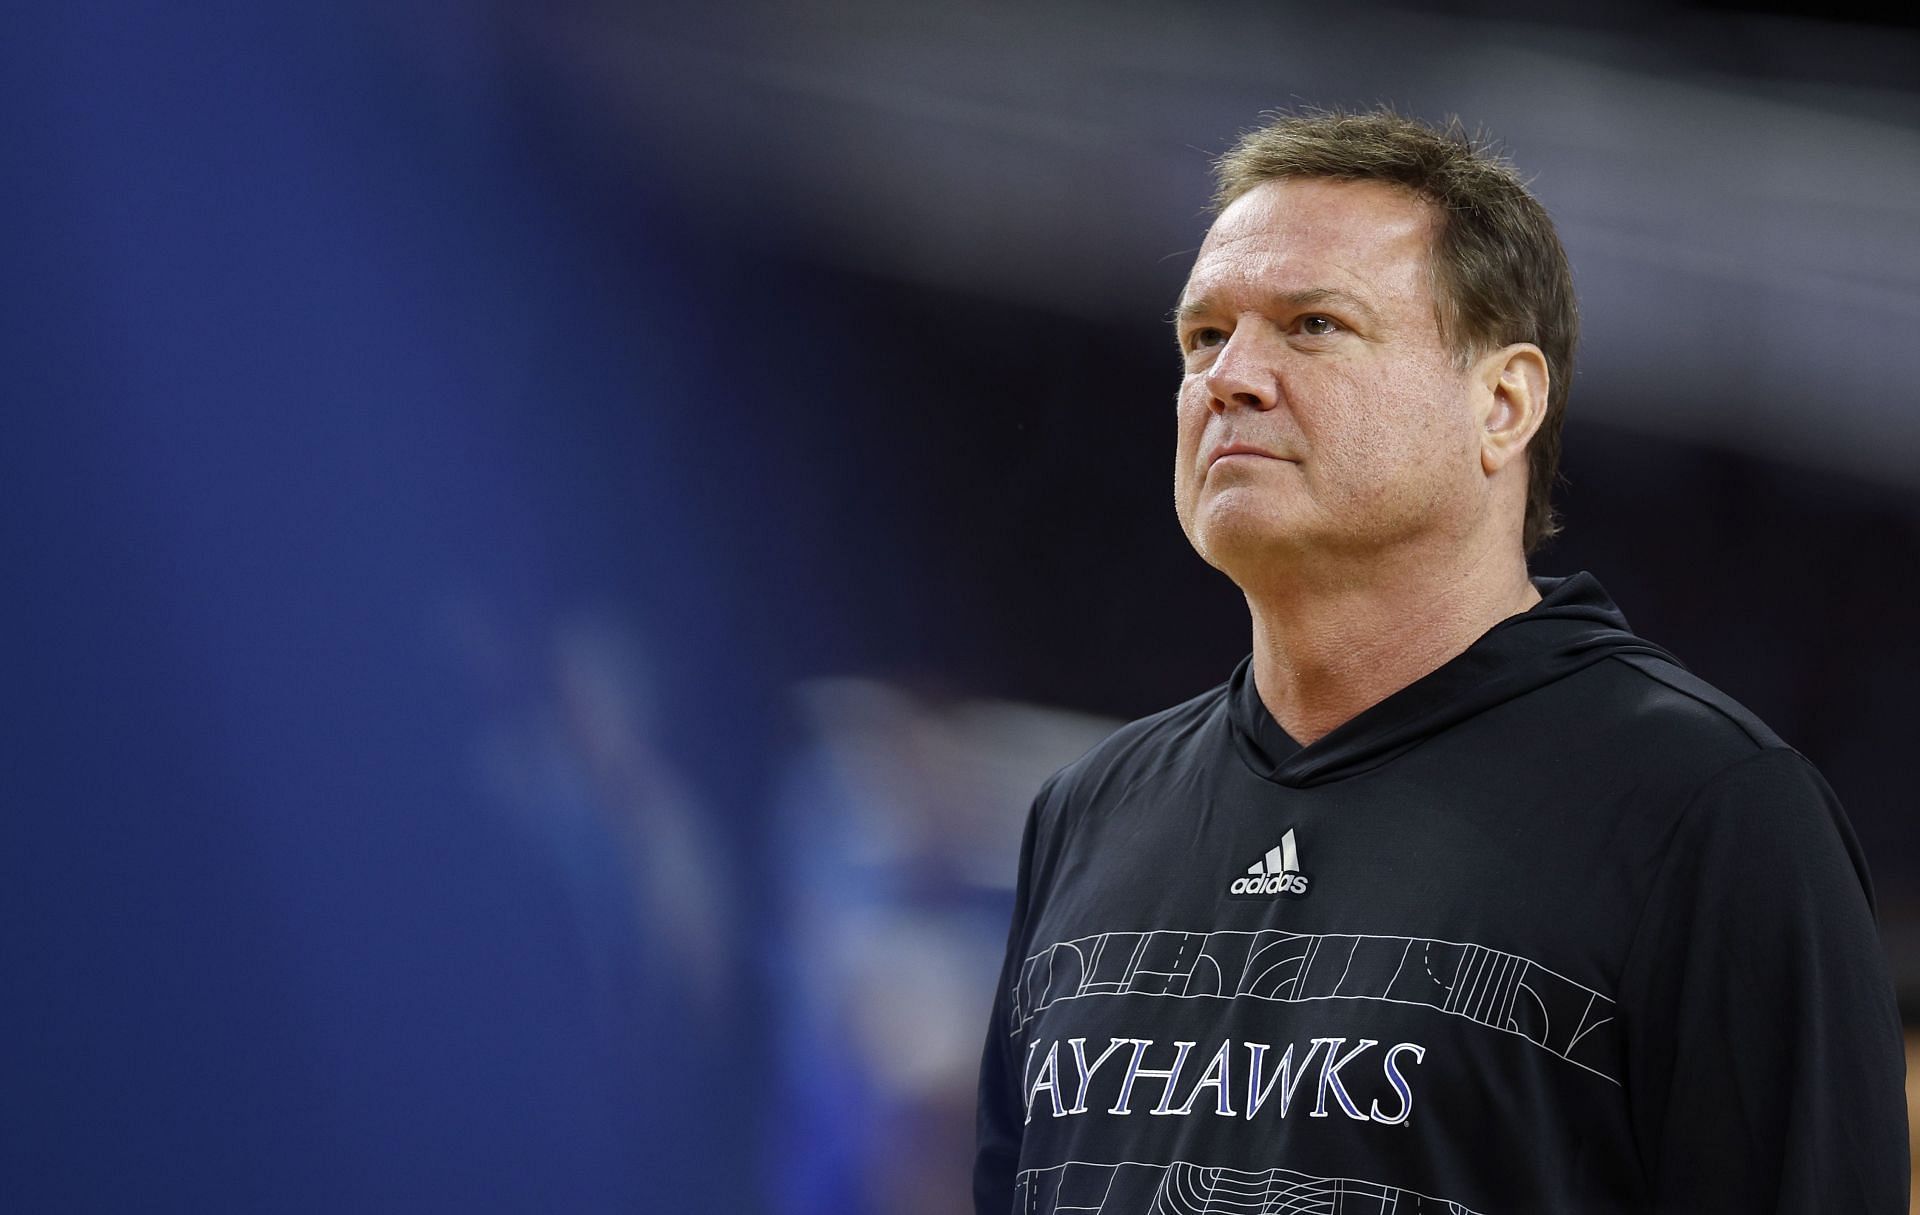 Kansas basketball coach Self is expected to recover fully (Image via Getty)